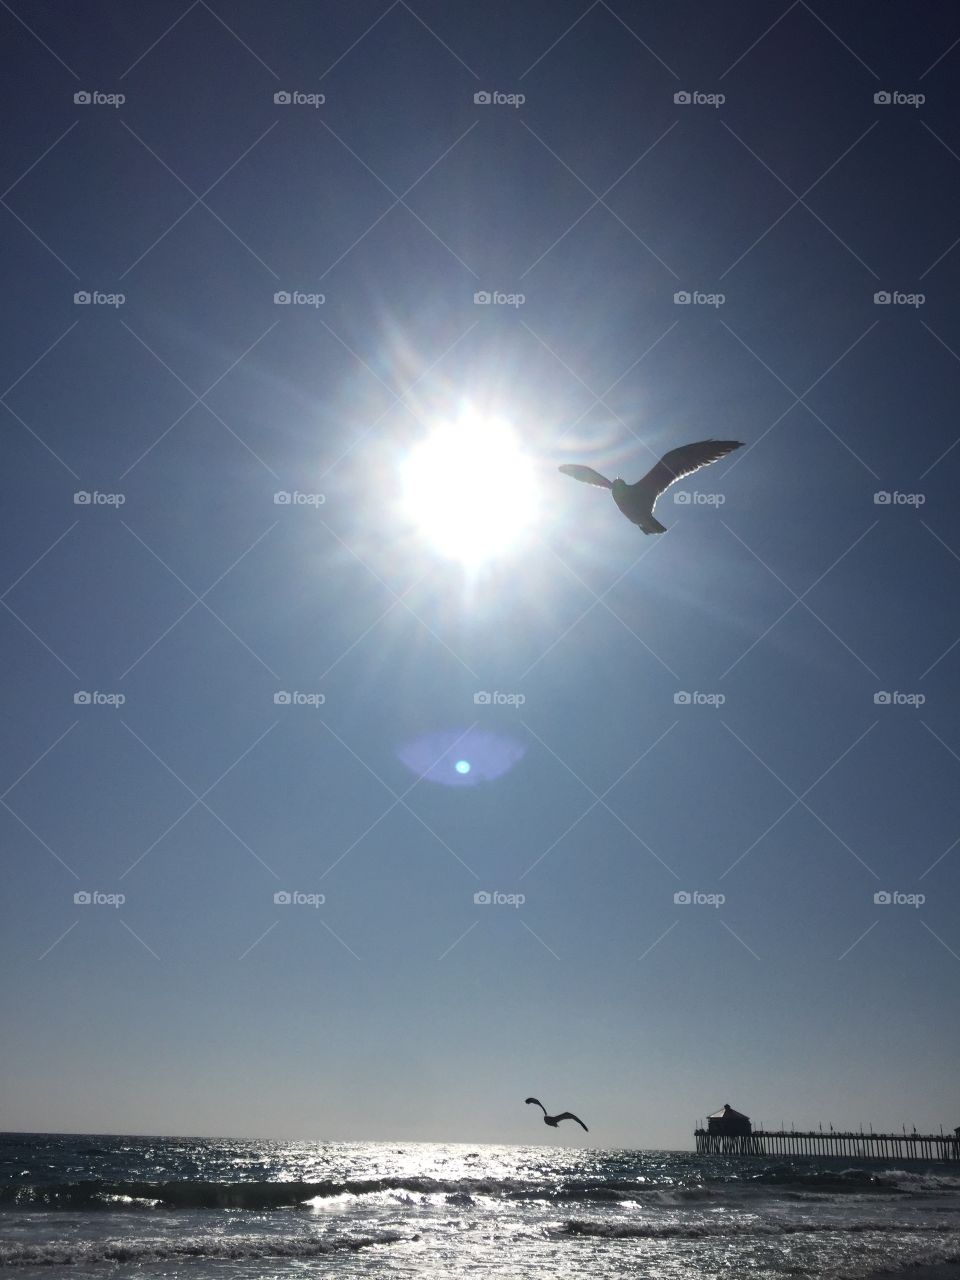 Just above the ocean waves, a seagull soars high in the blue sky, in front of the bright summer sun. 